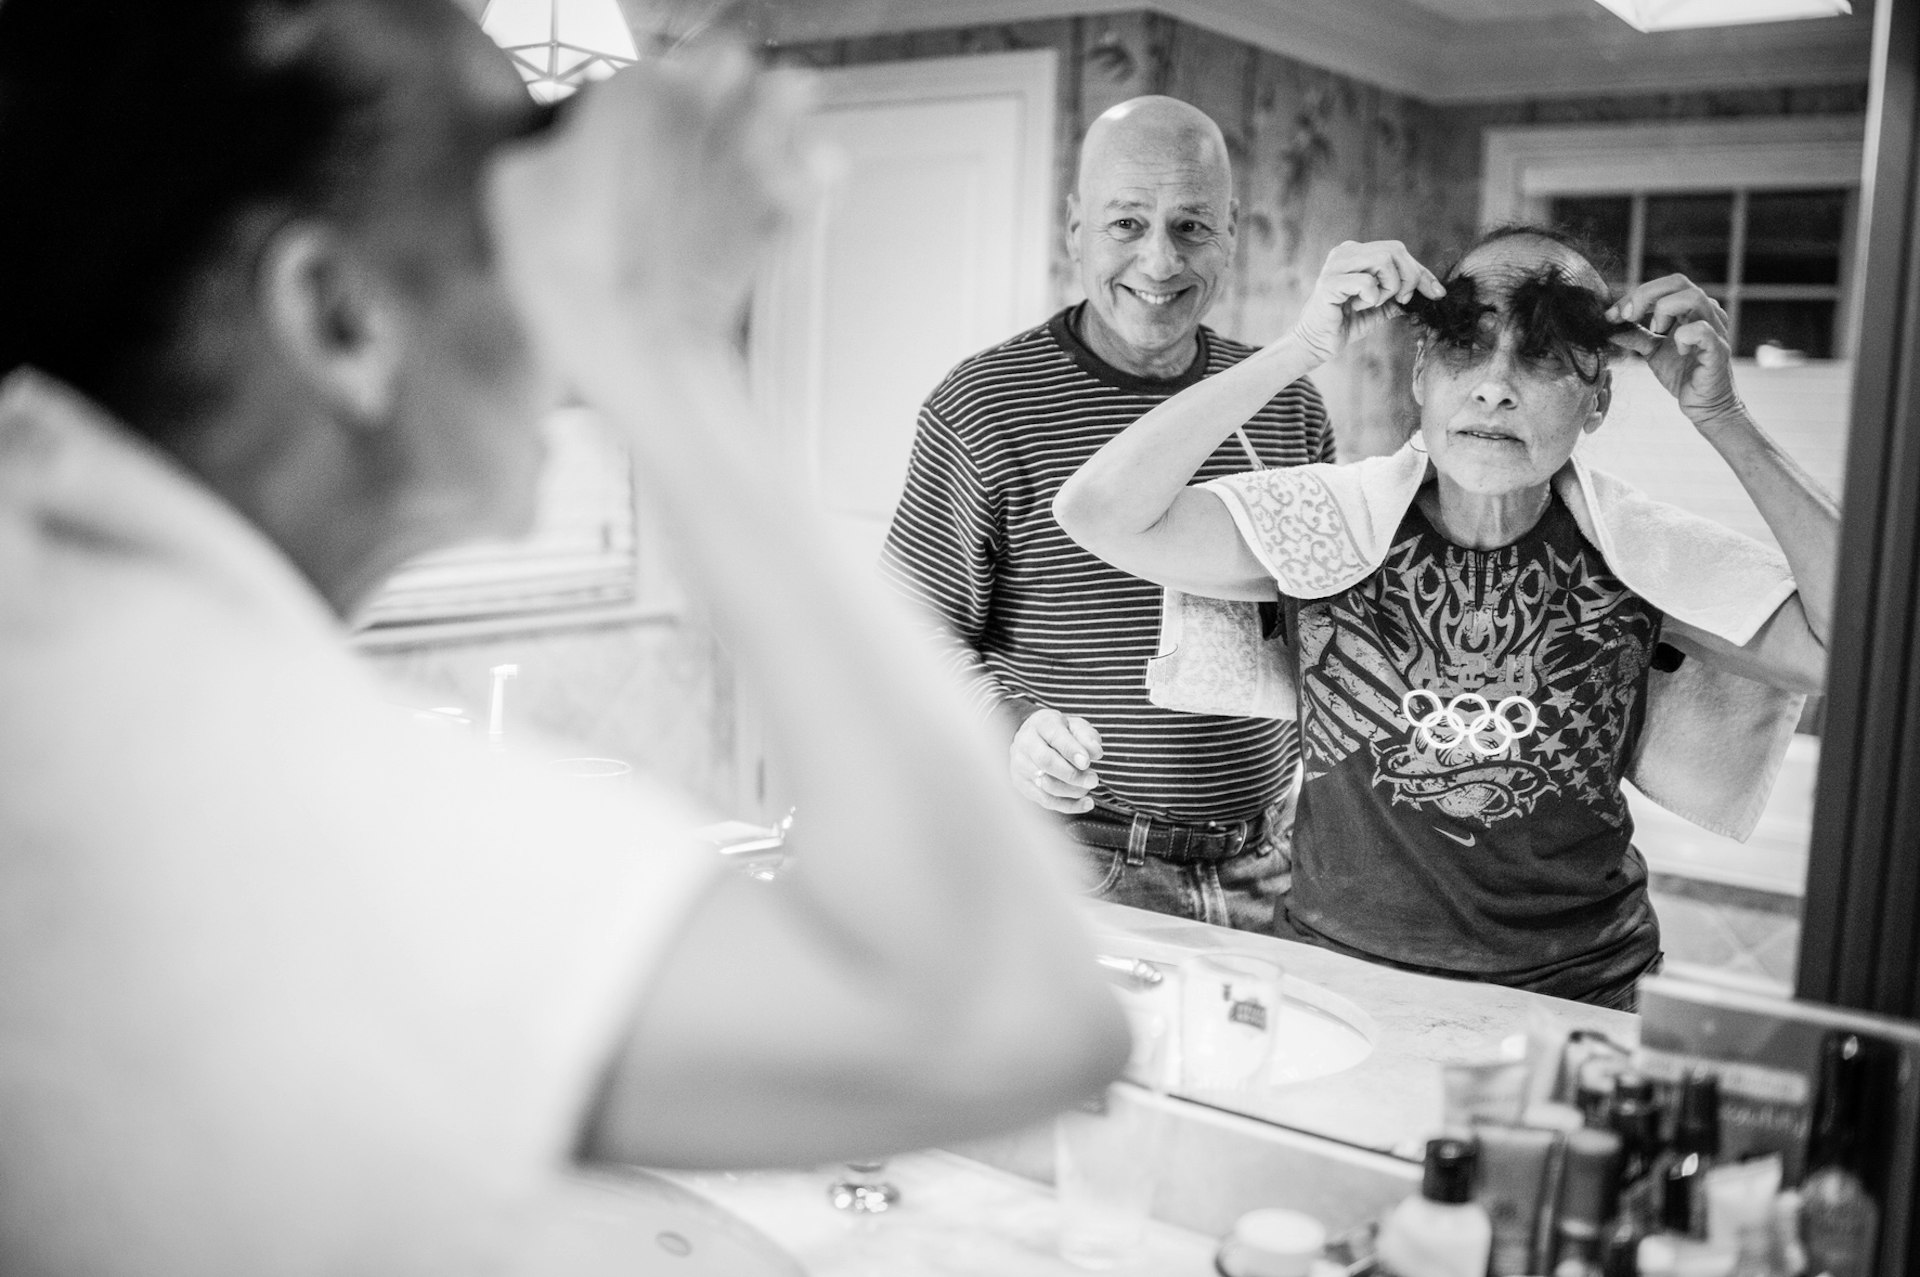 Nancy Borowick's mother and father, having cut their hair knowing it would fall out as a side-effect of chemotherapy. "Using humour allowed them to move forward and deal with what was happening because it was truly out of their control," says Borowick. Photo: Nancy Borowick.